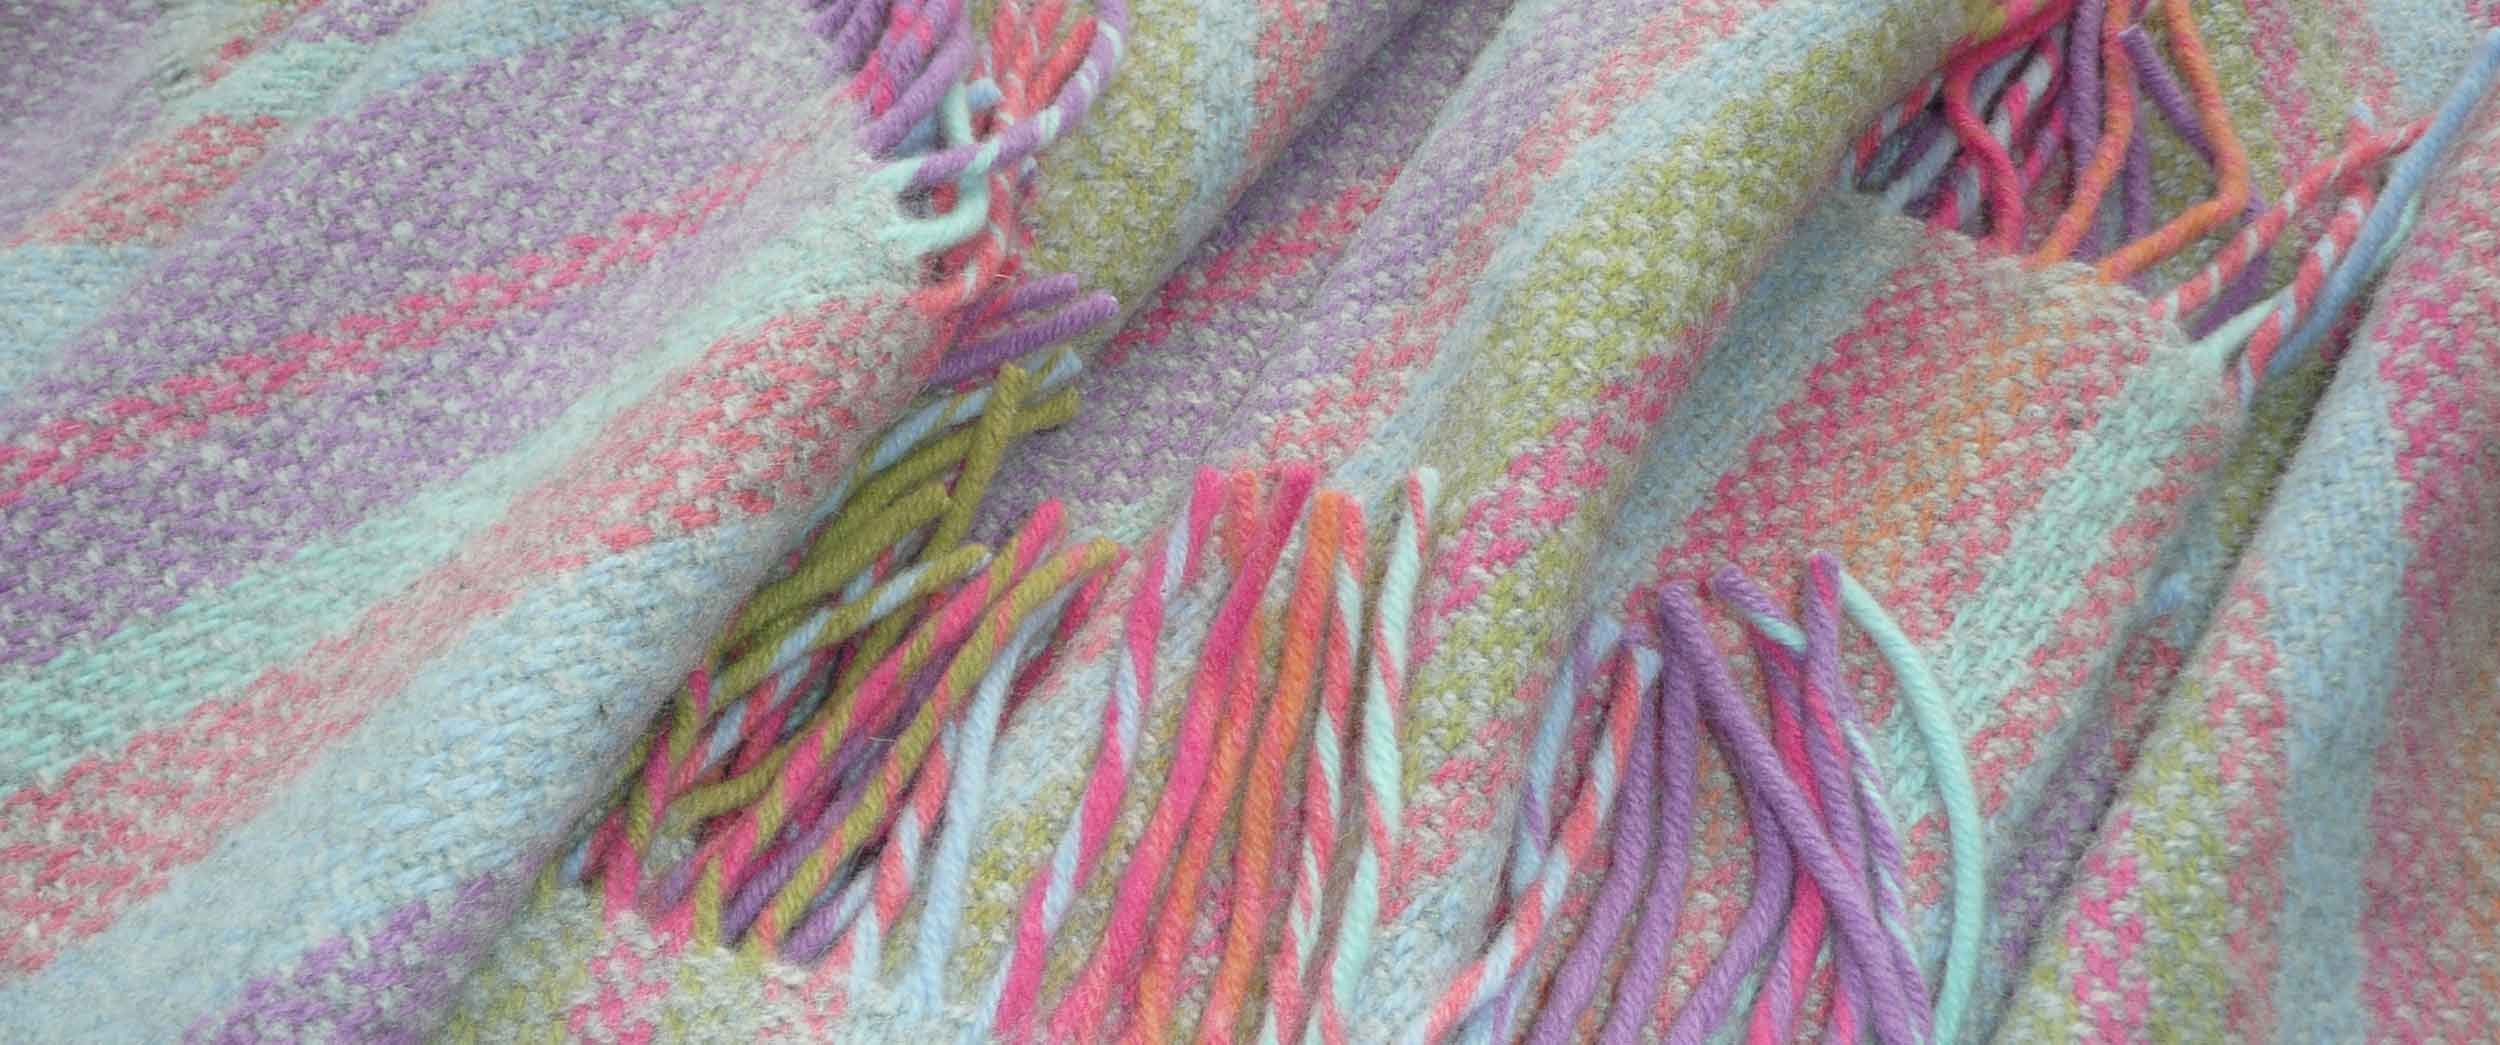 Striped Throws Merino and Cashmere Mix